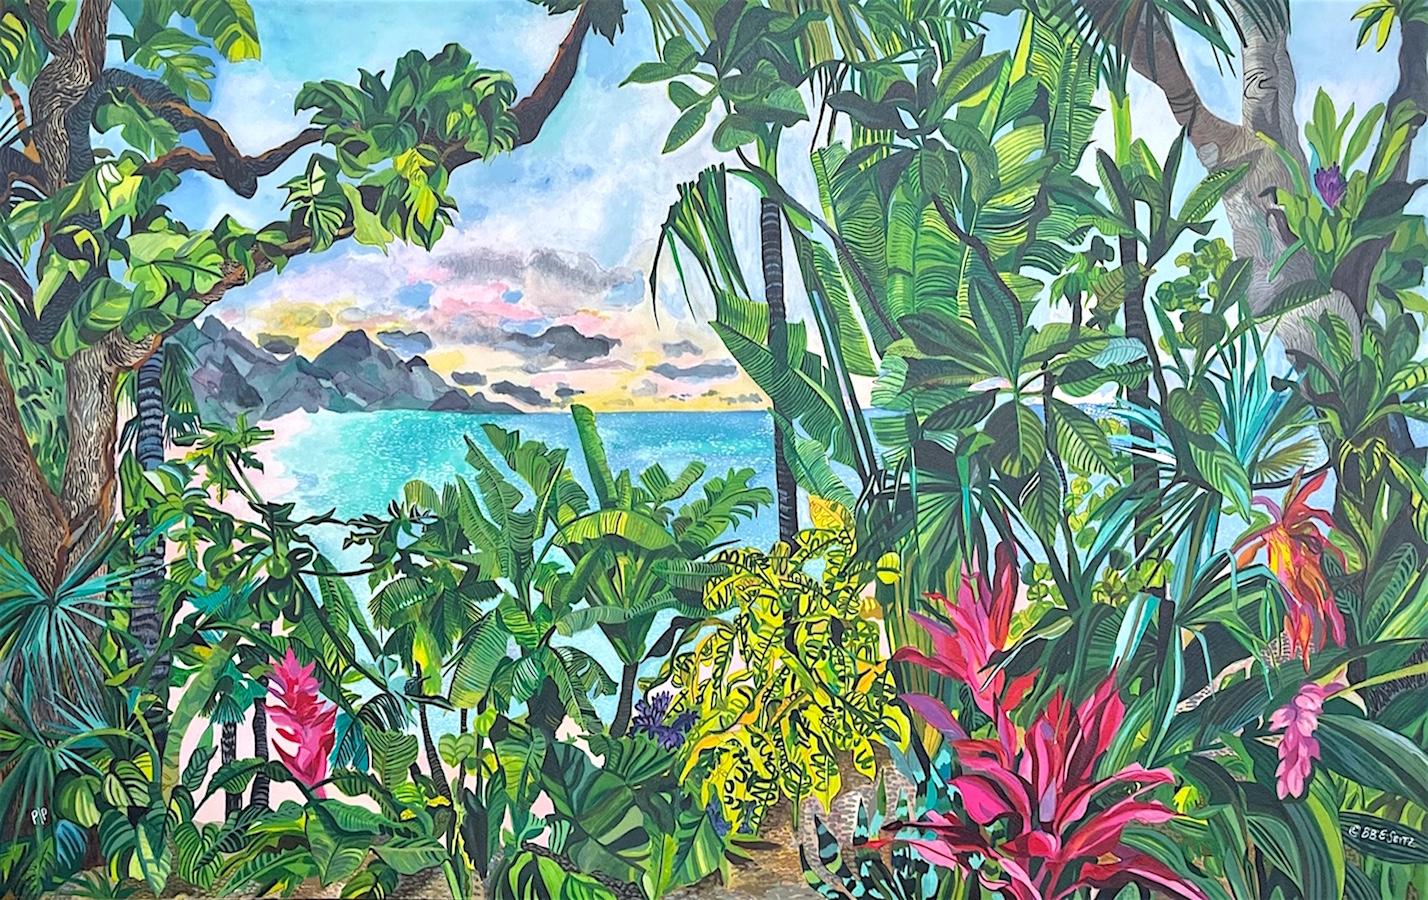 BEYOND EARTHS BEAUTY Signed Lithograph Colorful Island Landscape Tropical Plants